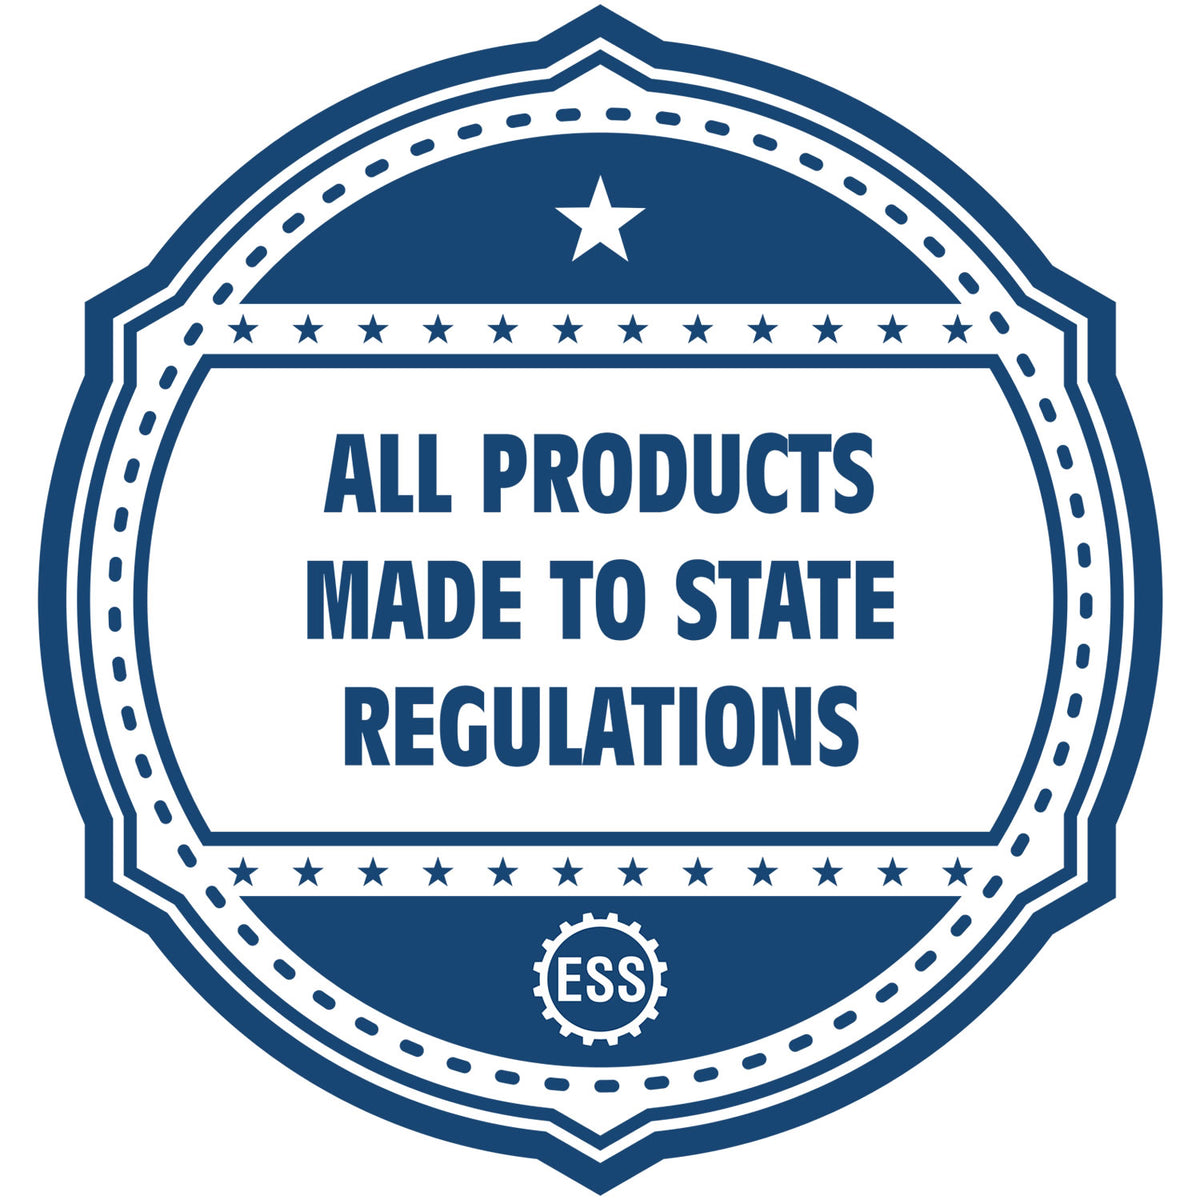 An icon or badge element for the Handheld Tennessee Professional Engineer Embosser showing that this product is made in compliance with state regulations.